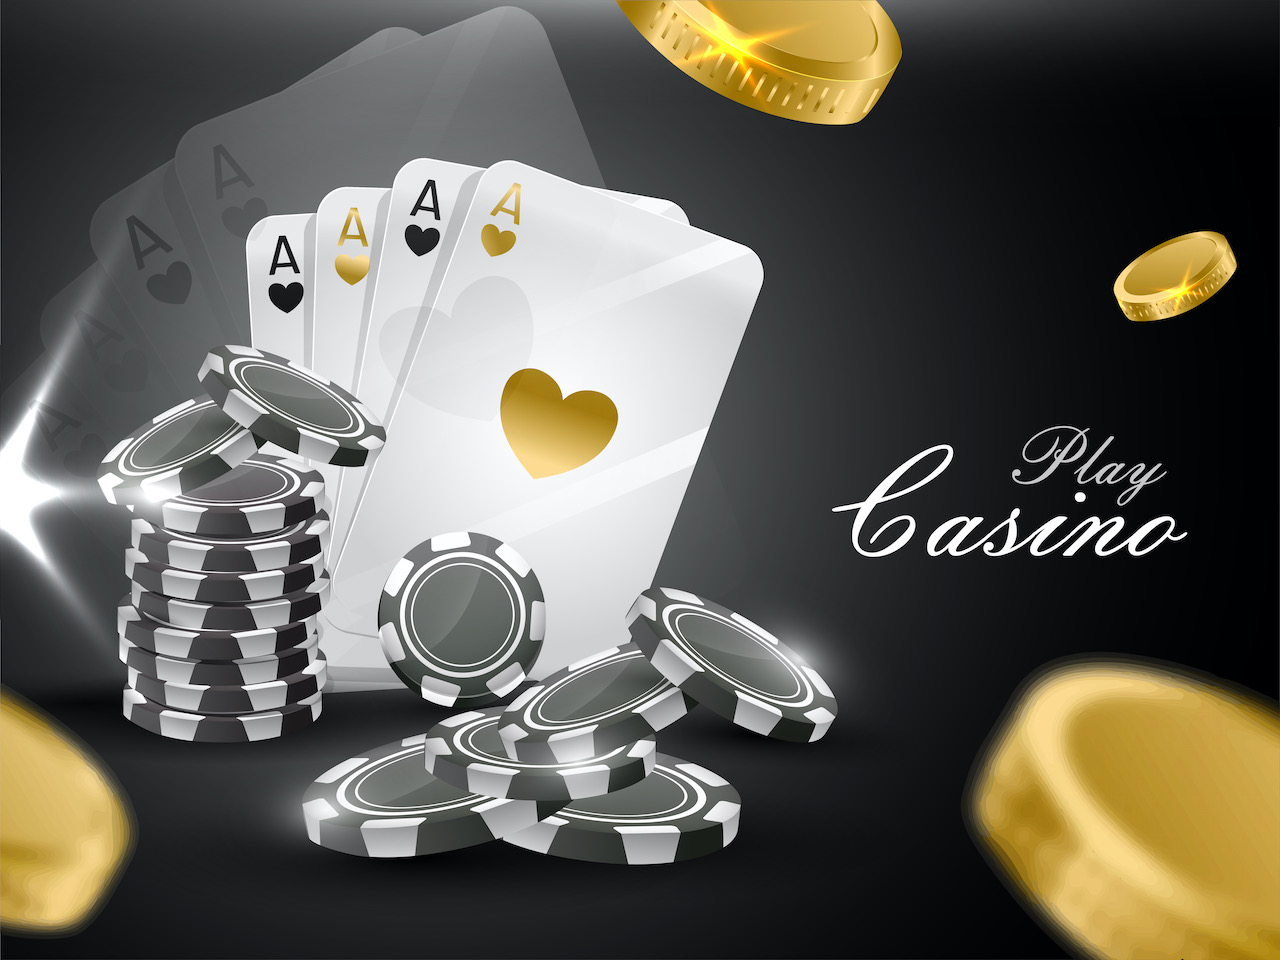 3d-illustration-of-casino-chips--playing-cards-and-gold-coins-on-black-background-for-play-casino-banner-or-poster-design